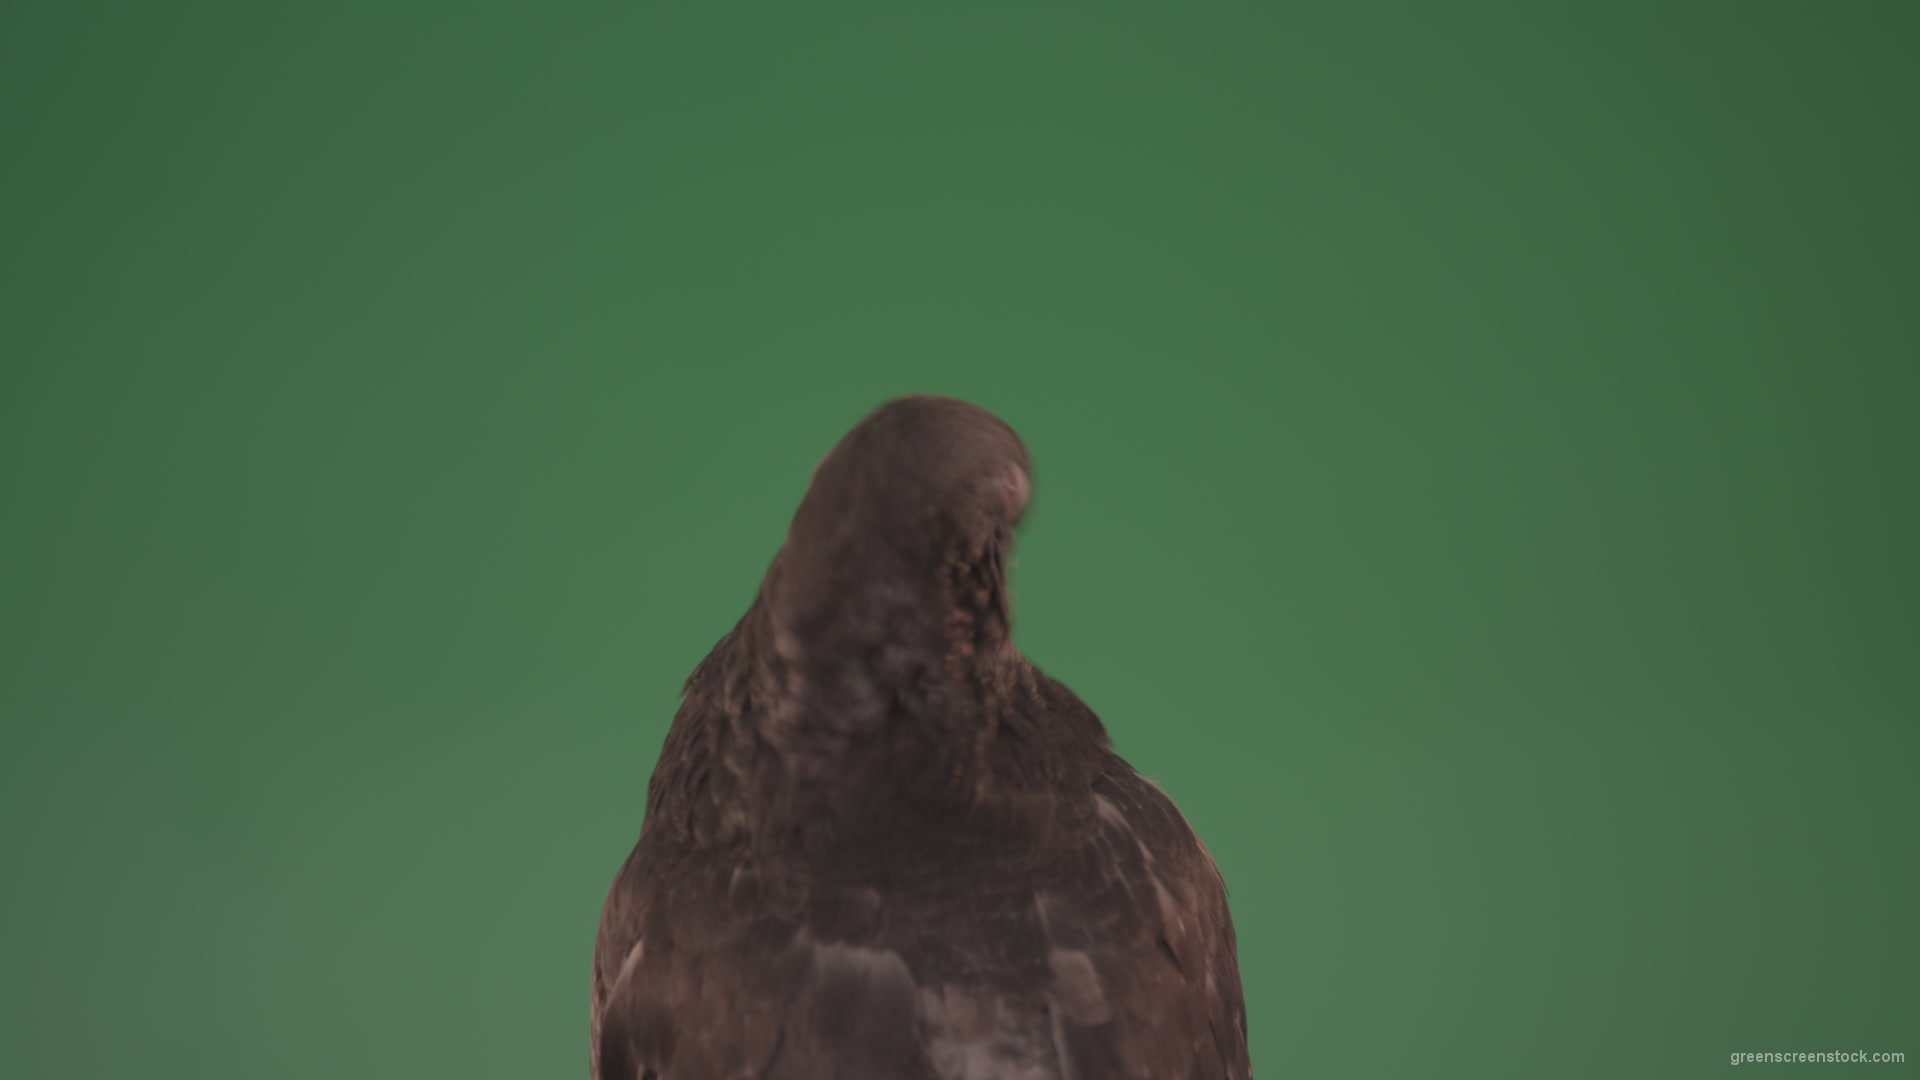 Sitting-wings-to-the-chicken-bird-home-pigeon-isolated-on-chromakey-background_006 Green Screen Stock